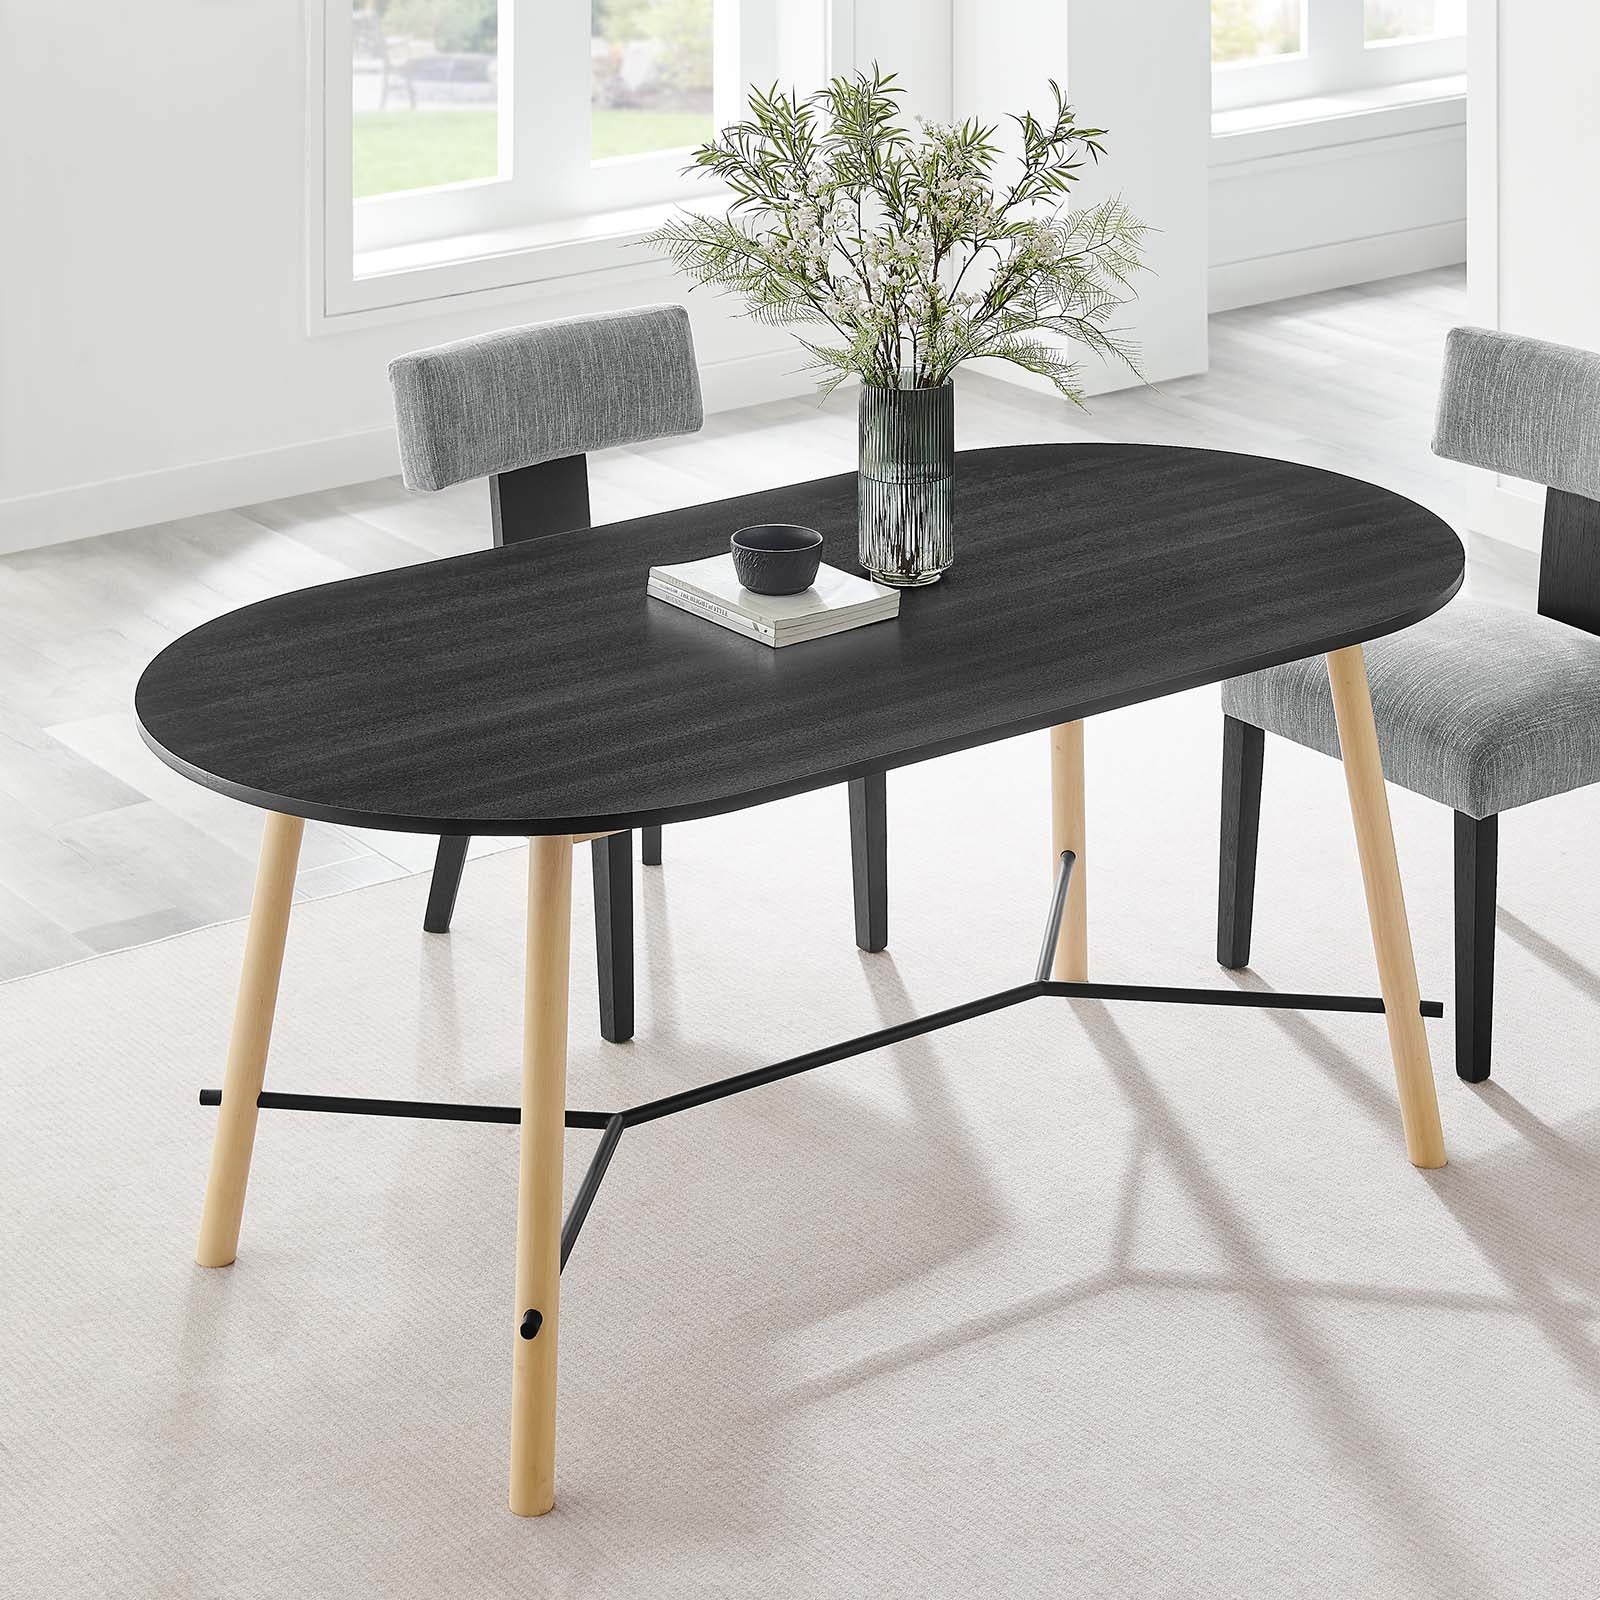 Infuse 71" Wood Grain Dining Table